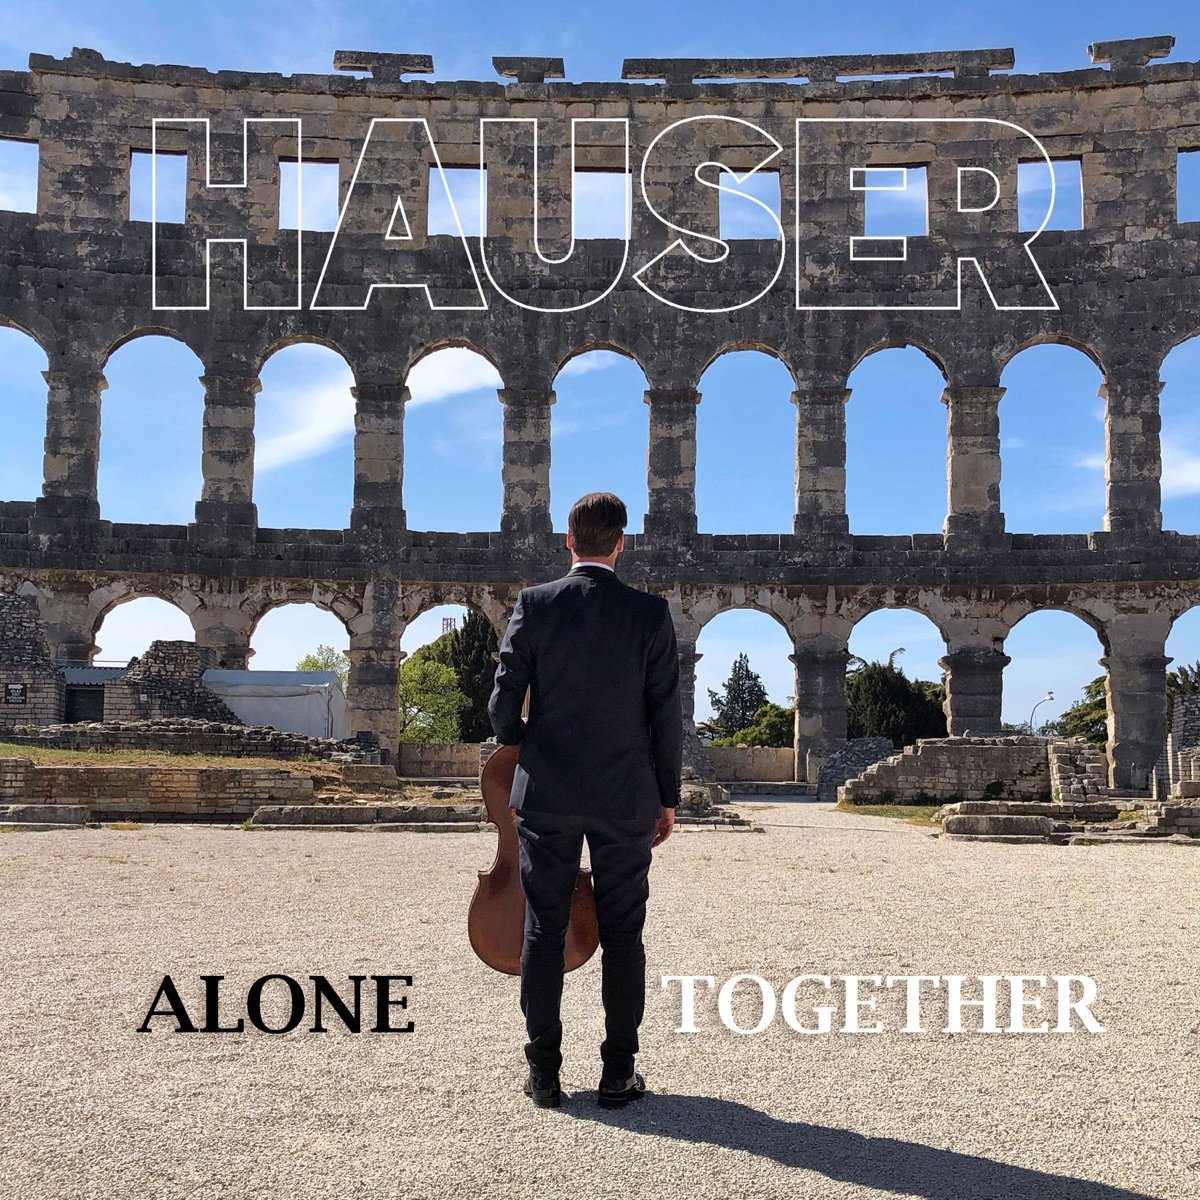 🎼🎼🎼🎼🎼🎼🎼🎼🎼🎼🎼🎼 #musiclovers 🎼🌹🎼 #HappySunday 🎼🌹🎼#HappyNewWeek #HAUSER #alonetogether Now We Are Free (Gladiator) May It Be (Lord Of The Rings) Adagio (Albinoni) The Godfather Thème Game of Thrones Pirates Of The Caribbean 🎼🌹youtube.com/watch?v=-DitEA…